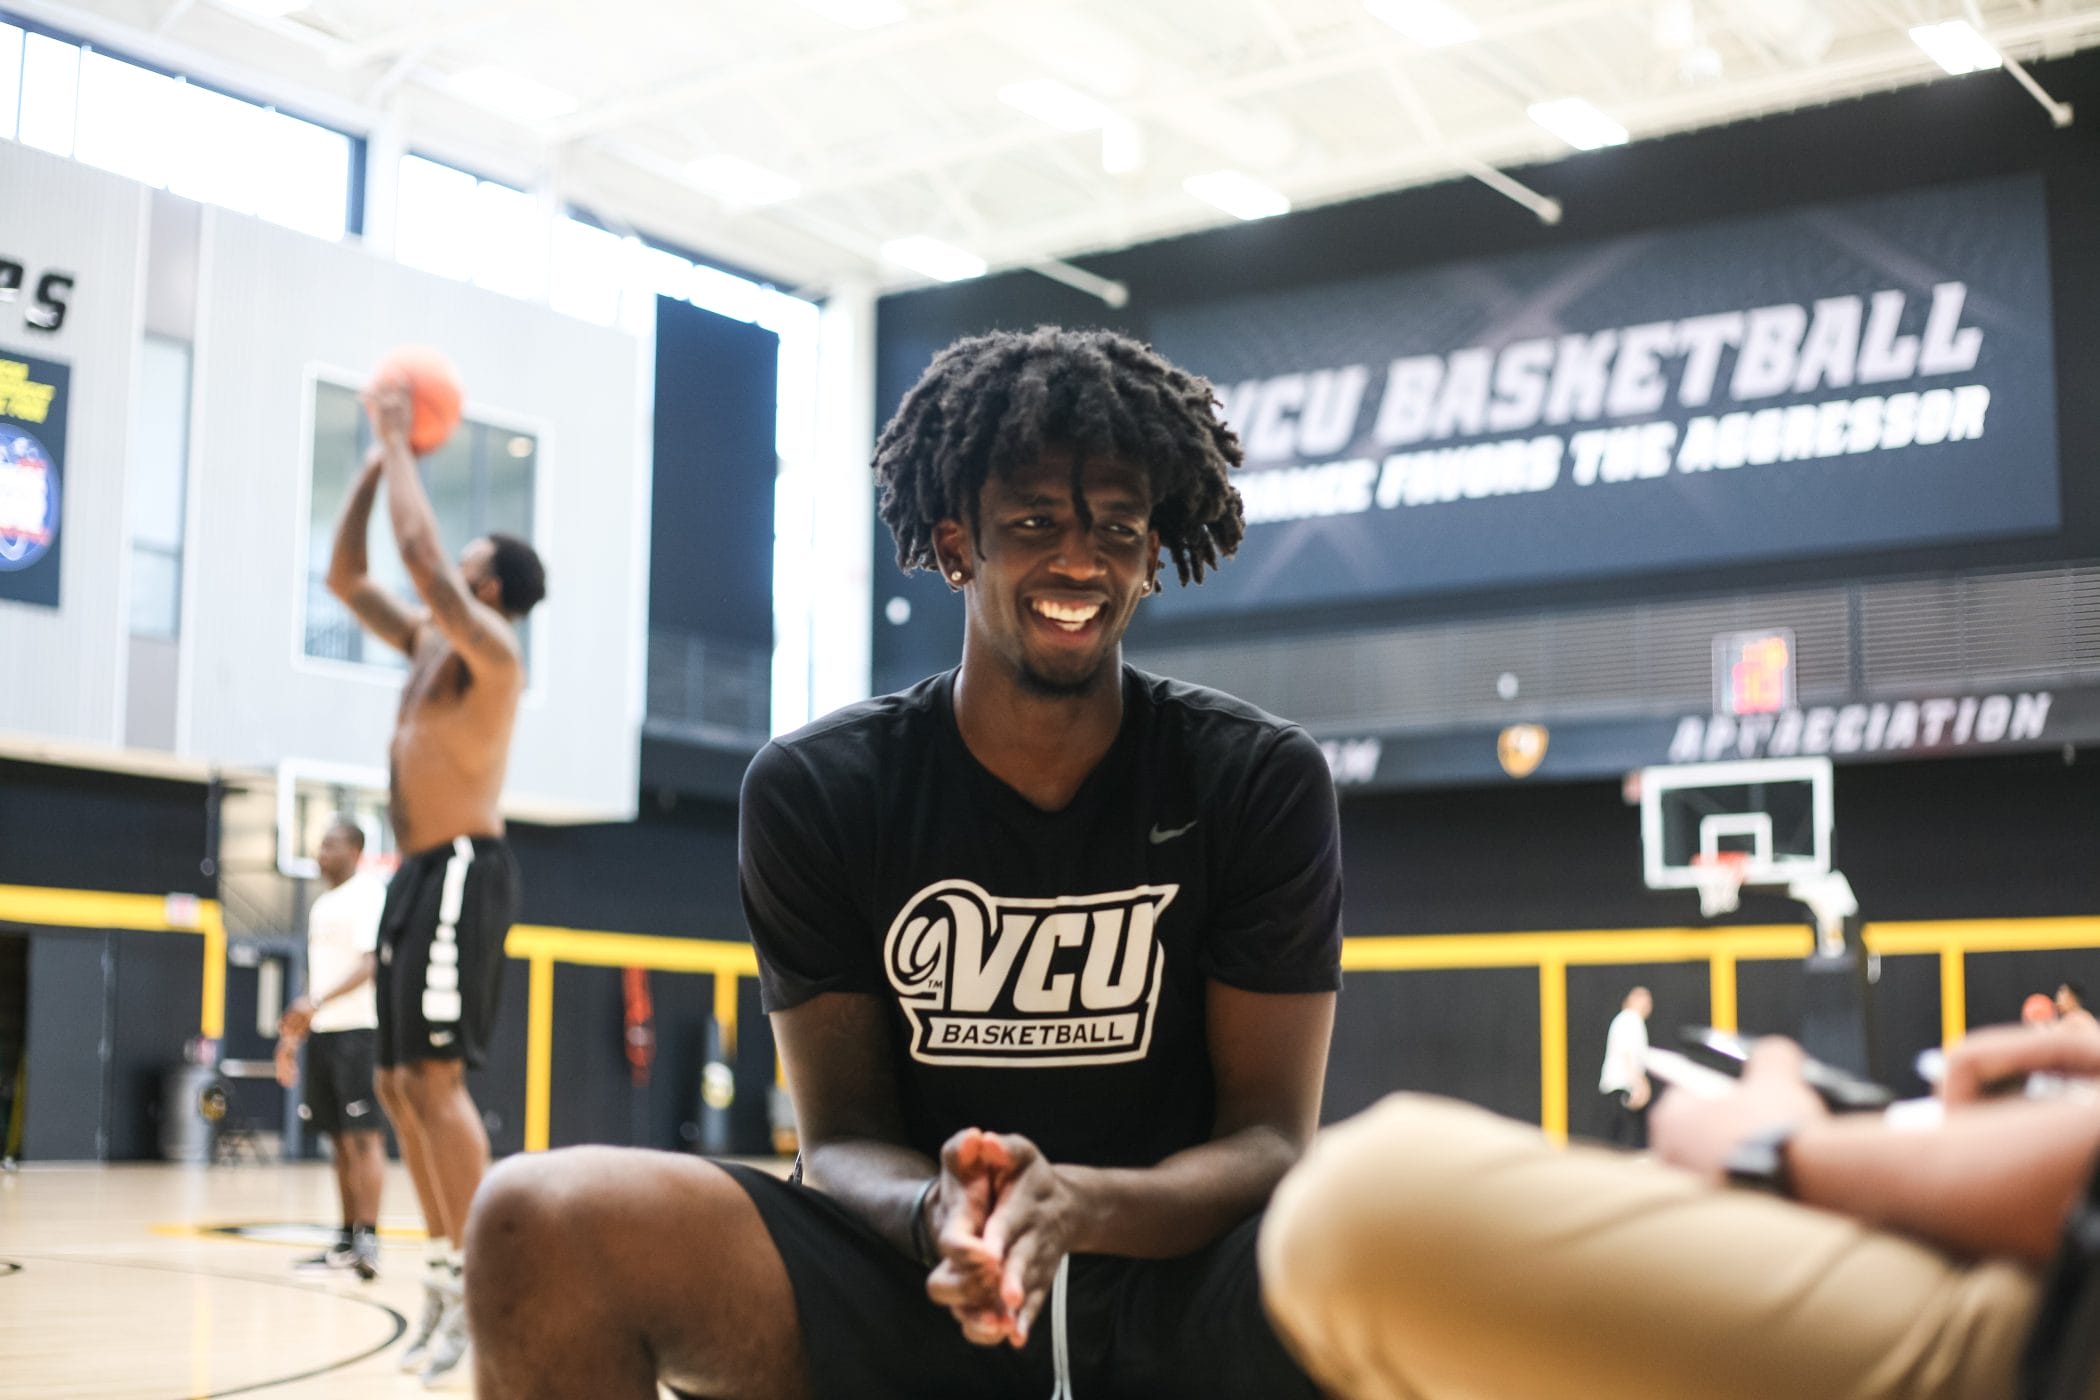 A complete breakdown of this year's VCU Basketball roster